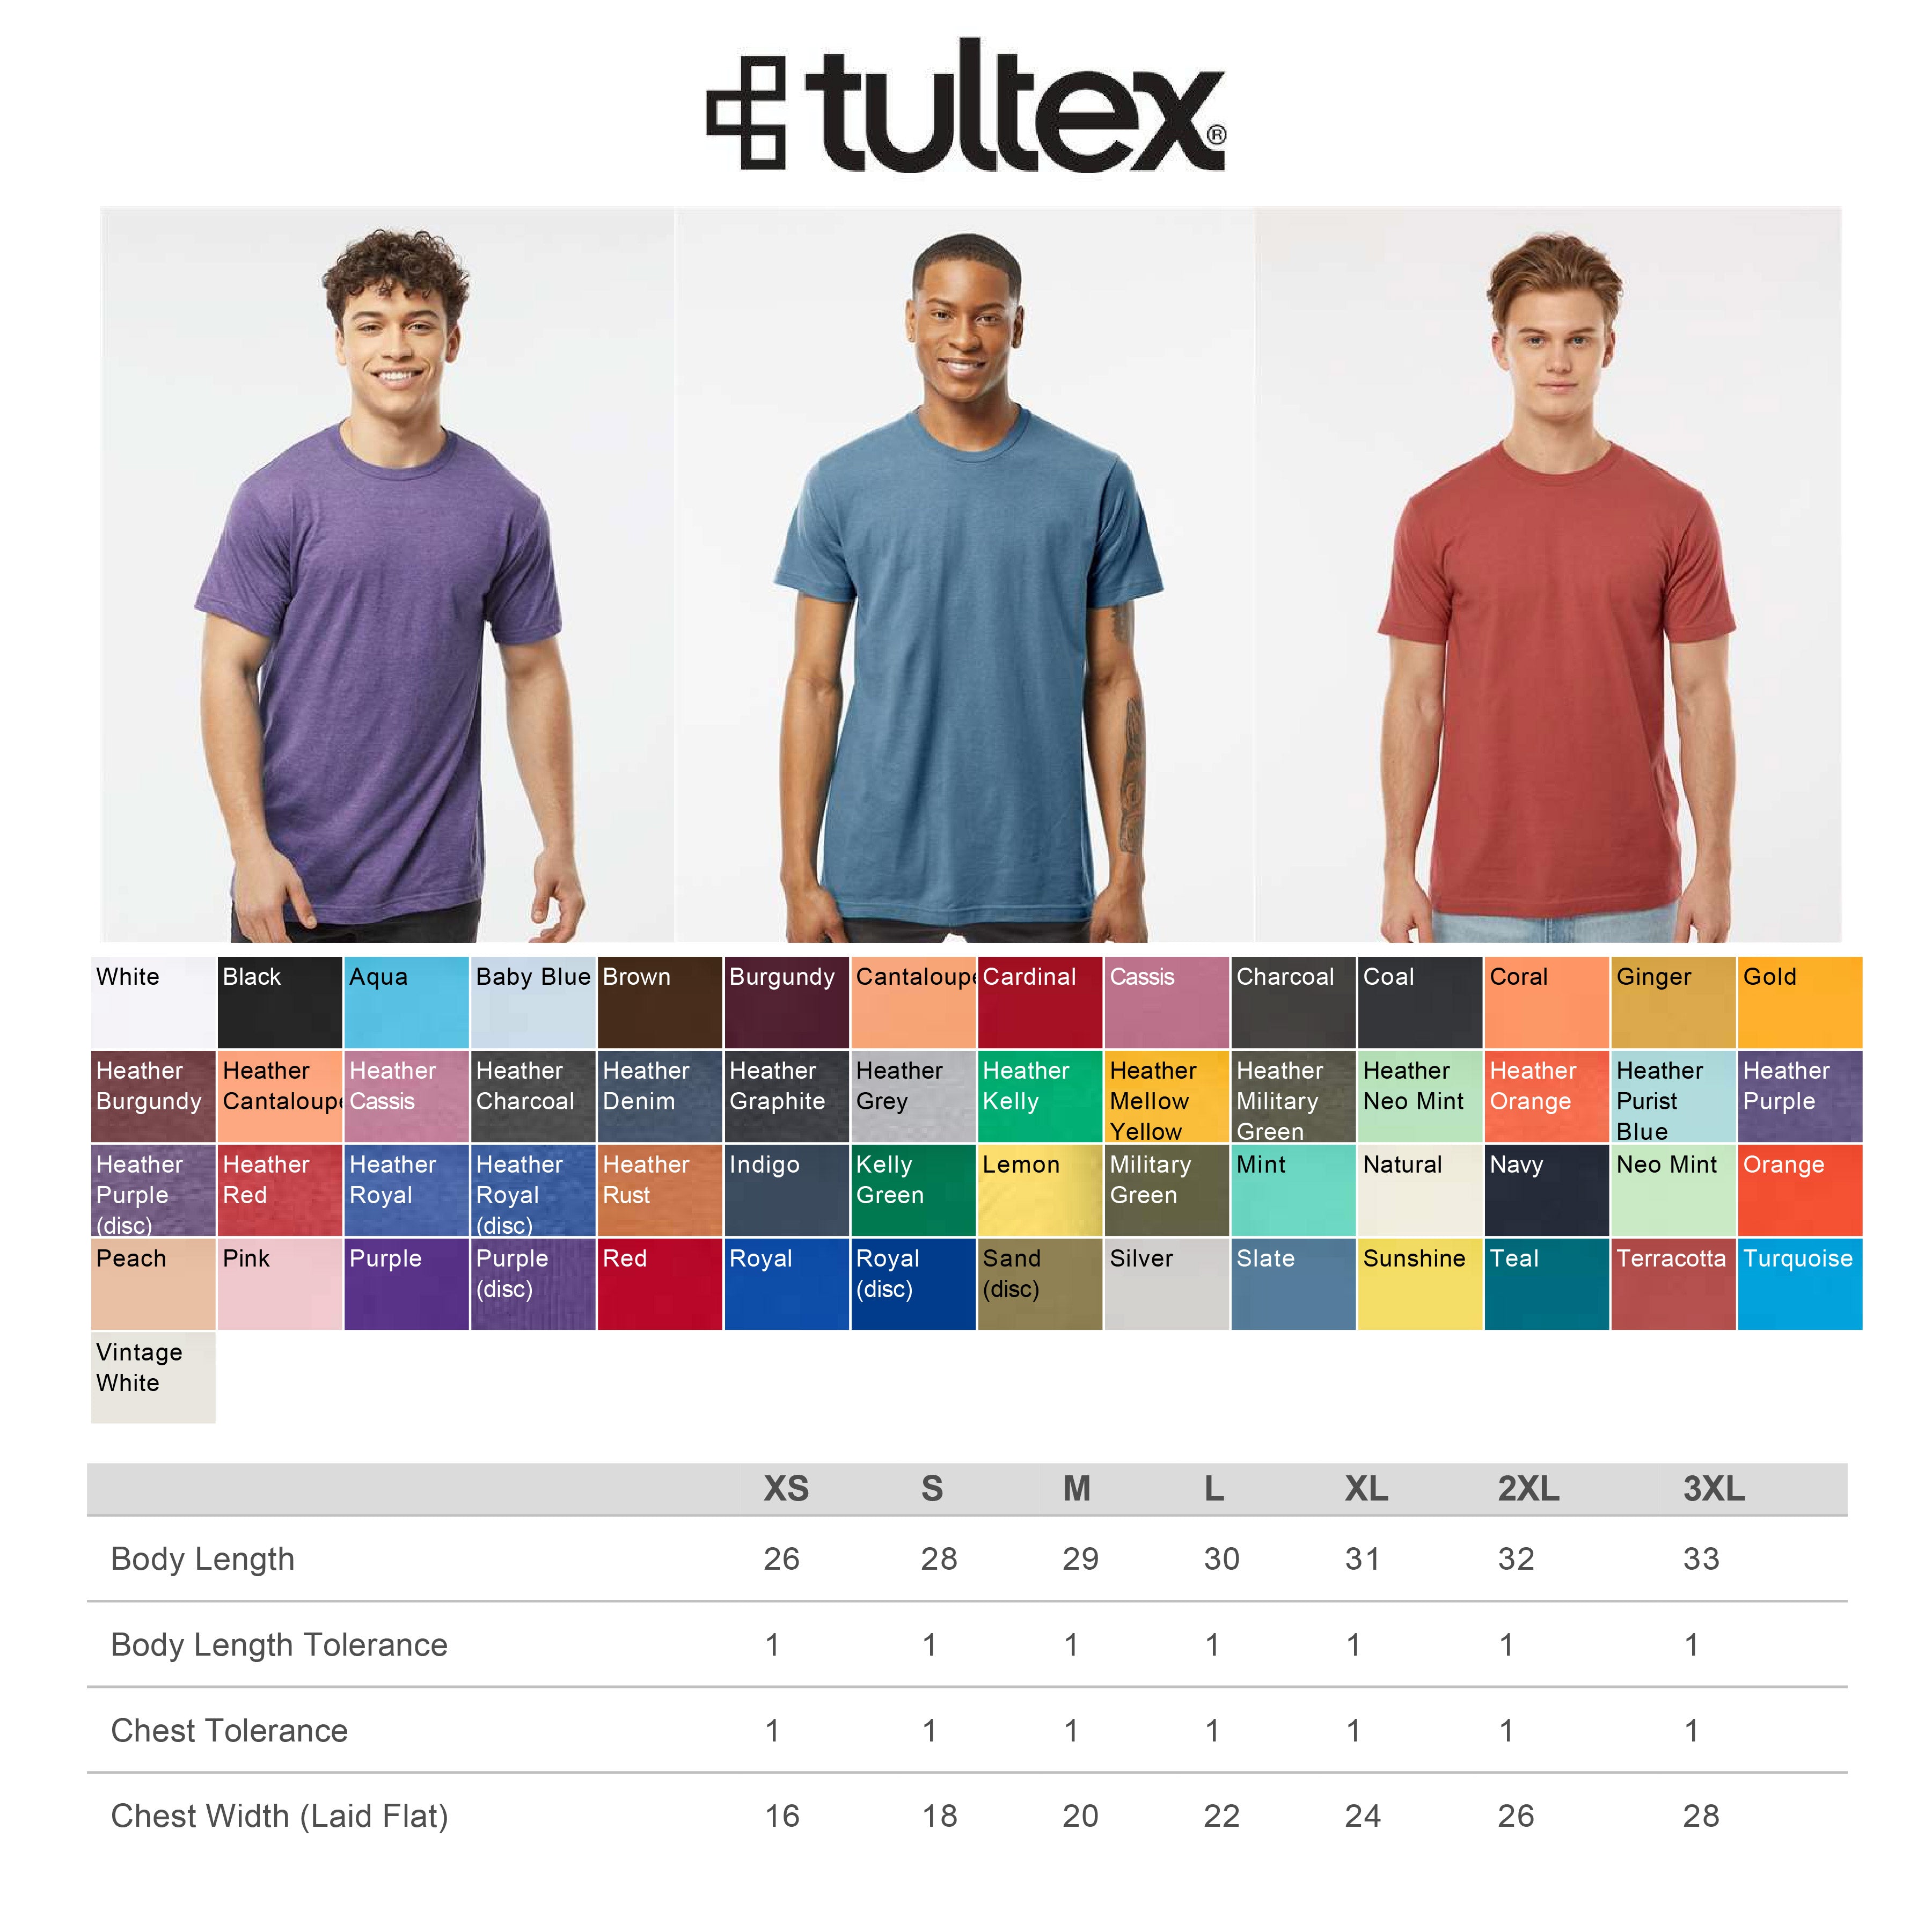 tultex product info